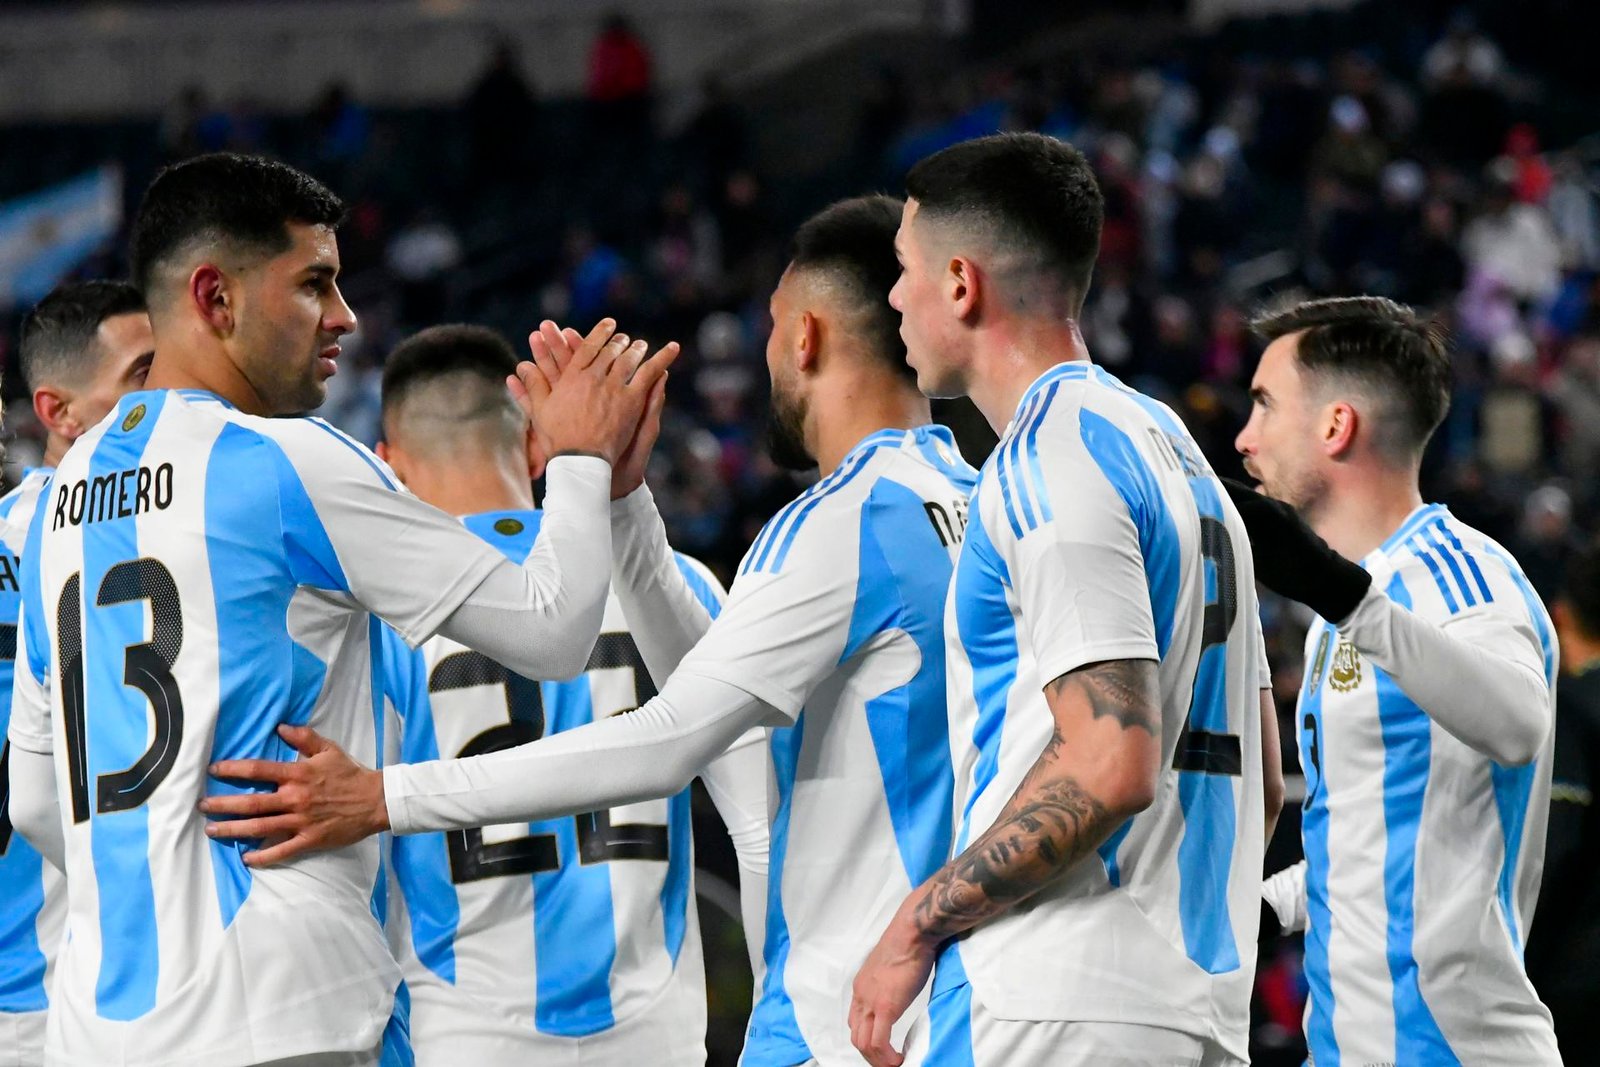 The match between Argentina and Canada will open the Copa America tournament, which Costa Rica will also join